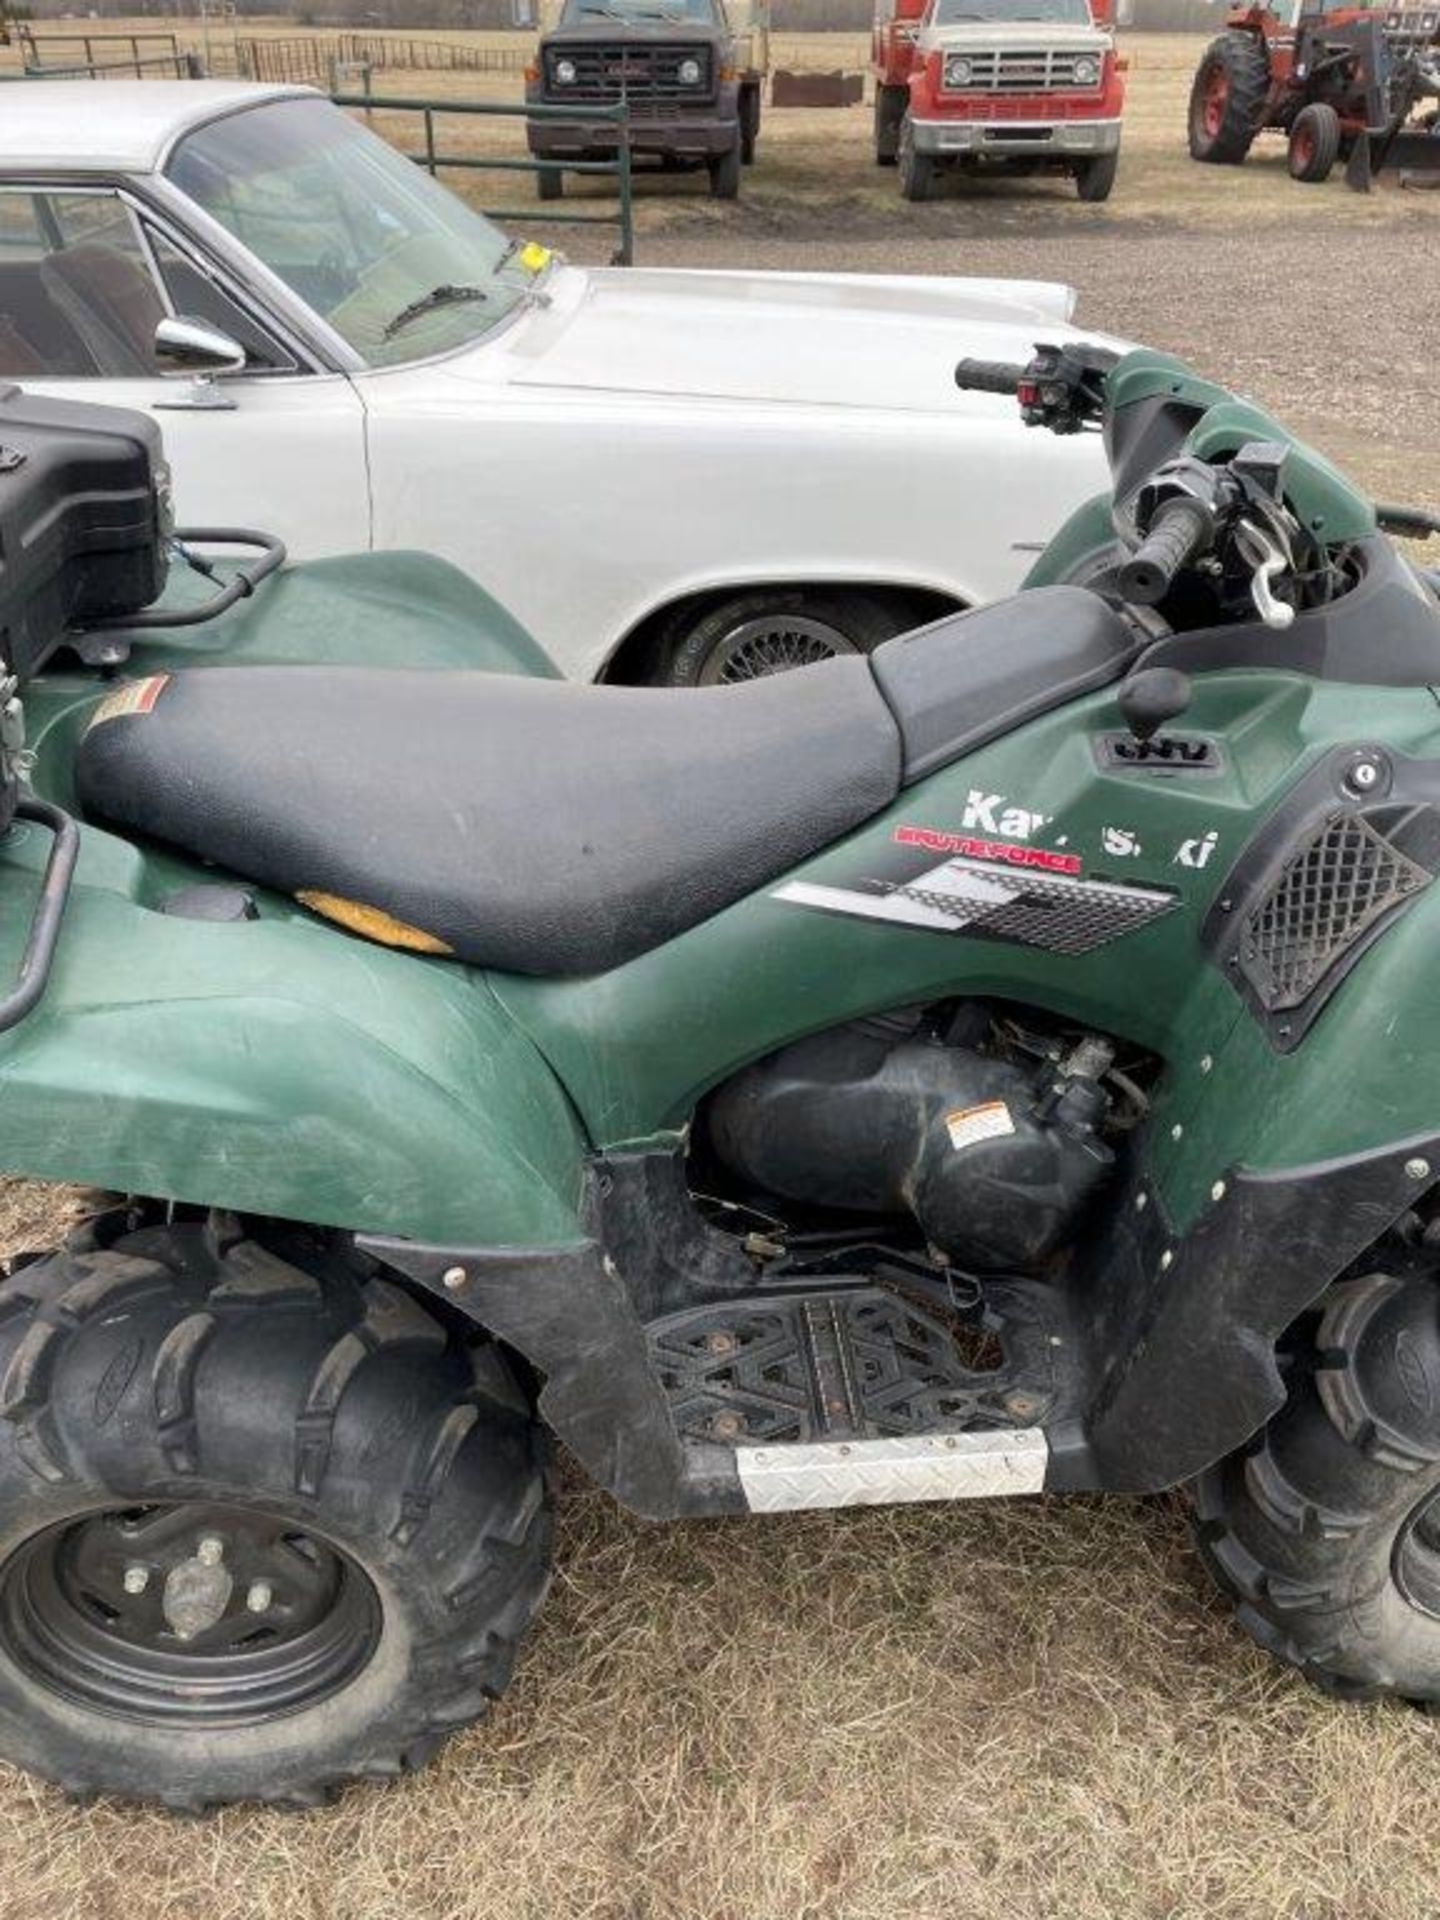 2007 KAWASAKI BRUTE FORCE 750 ATV 4X4 AUTO, RECENT CARB CLEAN, NEW BATTERY, 1762 KM'S SHOWING - Image 6 of 19